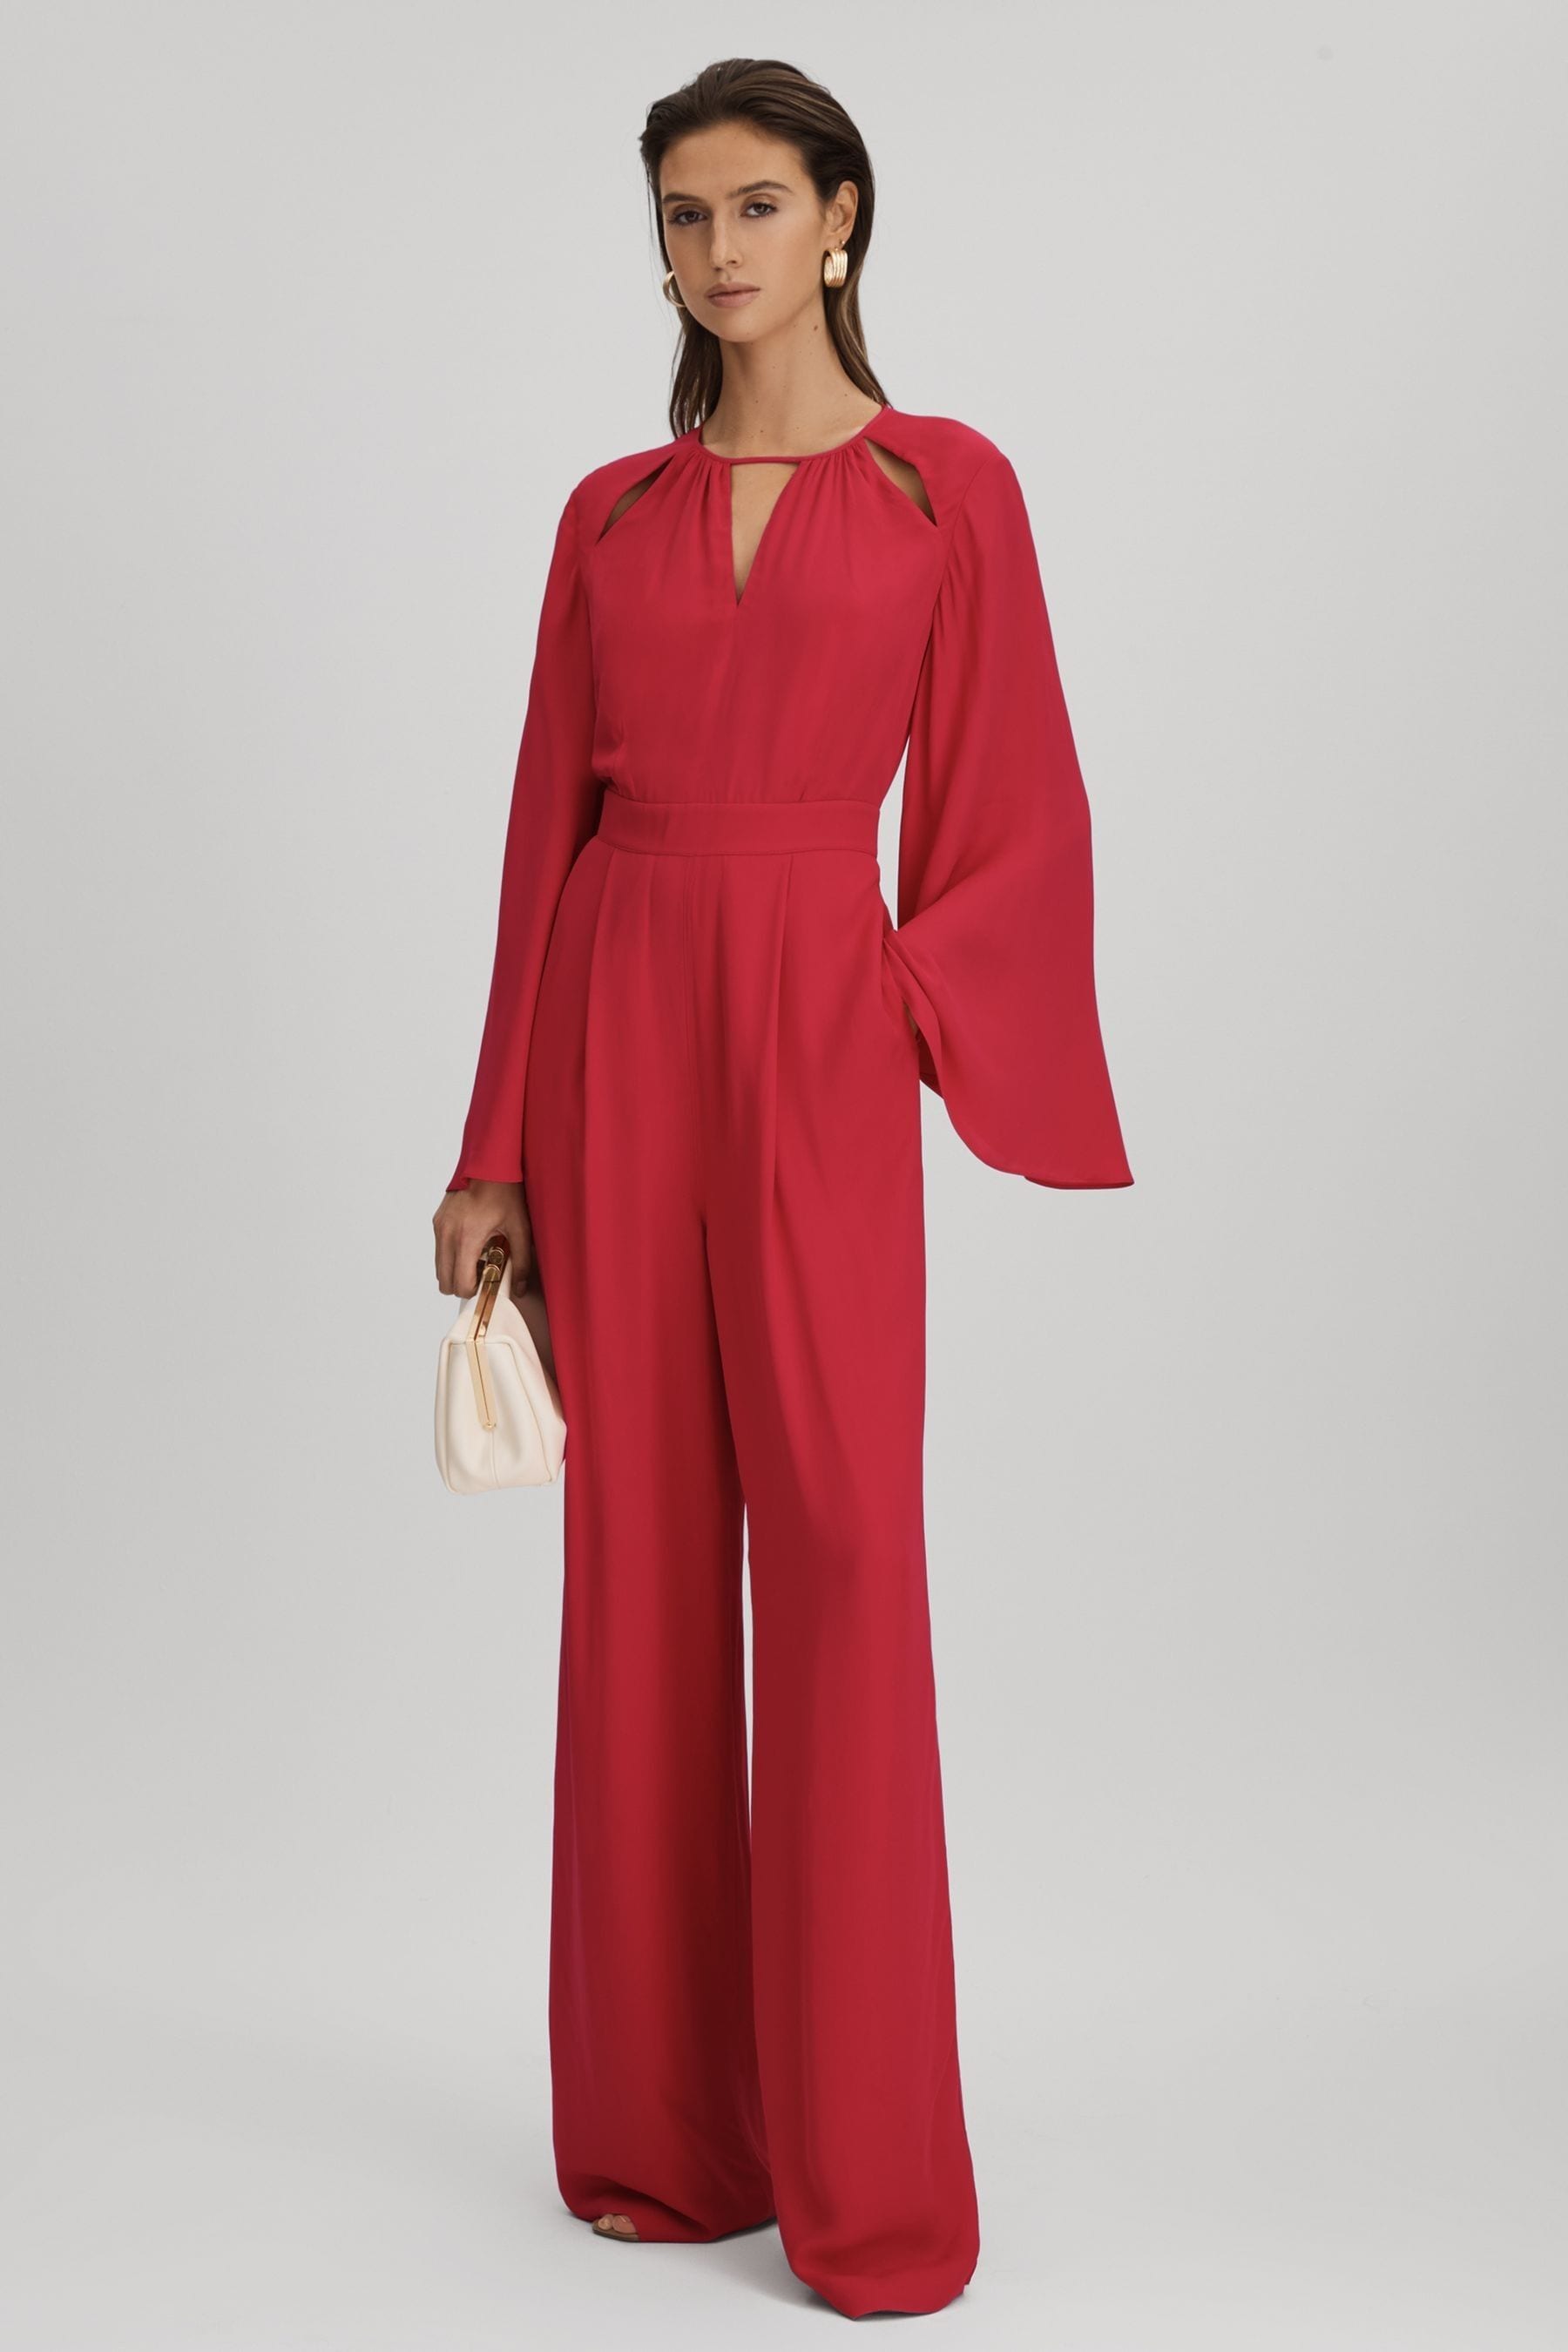 Reiss Tania - Coral Cut-out Flared Sleeve Jumpsuit, Us 6